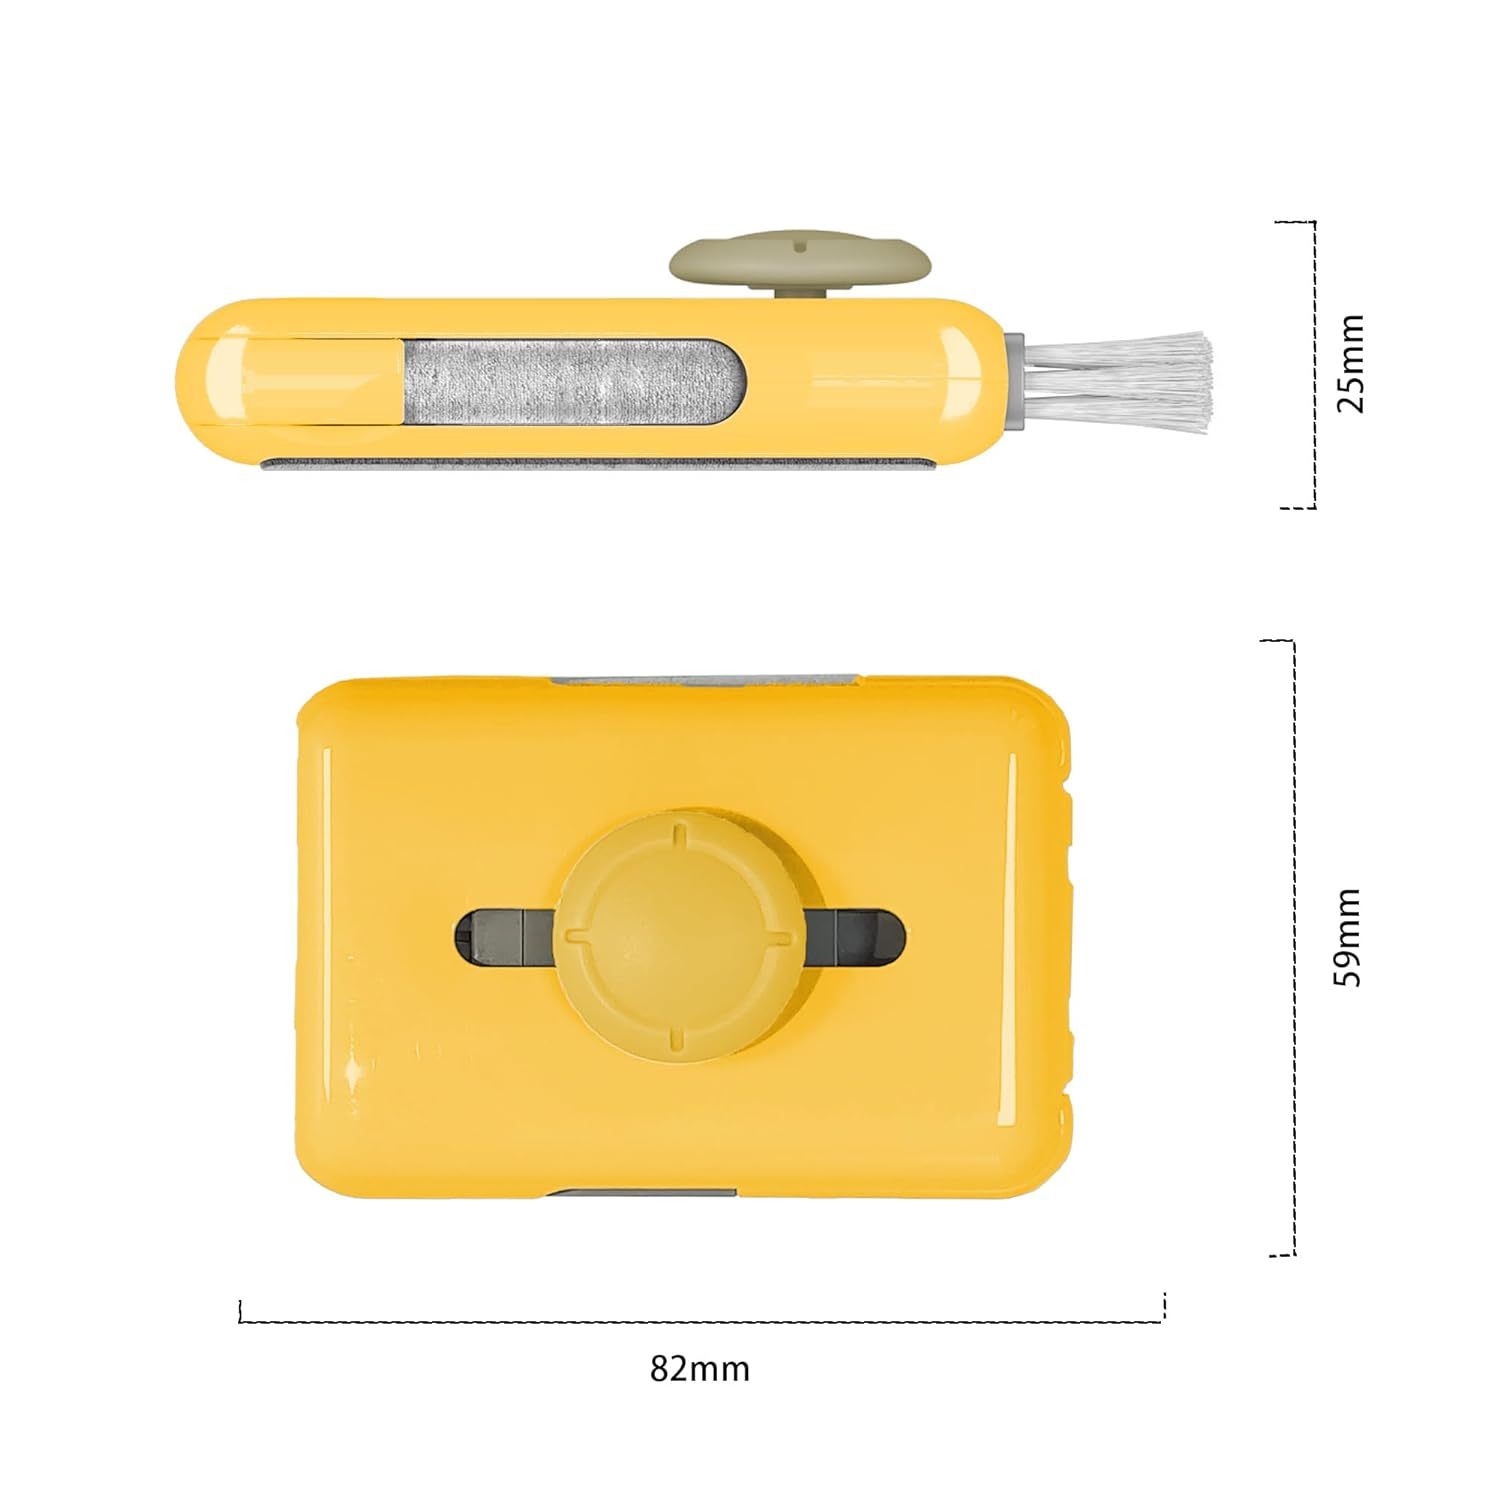 Keyanlai Airpods Cleaner kit,Electronics Cleaning Brush Tool for Computer, PC Monitor,TV Camera Lens with Microfiber Cloth (Yellow)